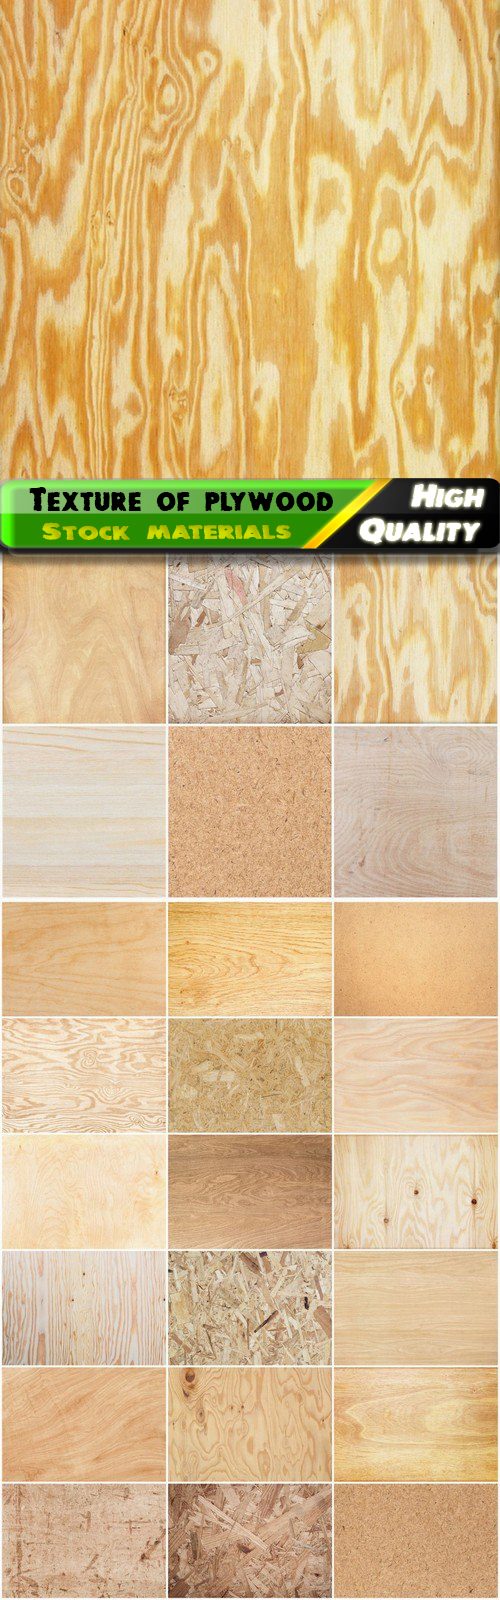 Texture of wood and plywood - 25 HQ Jpg